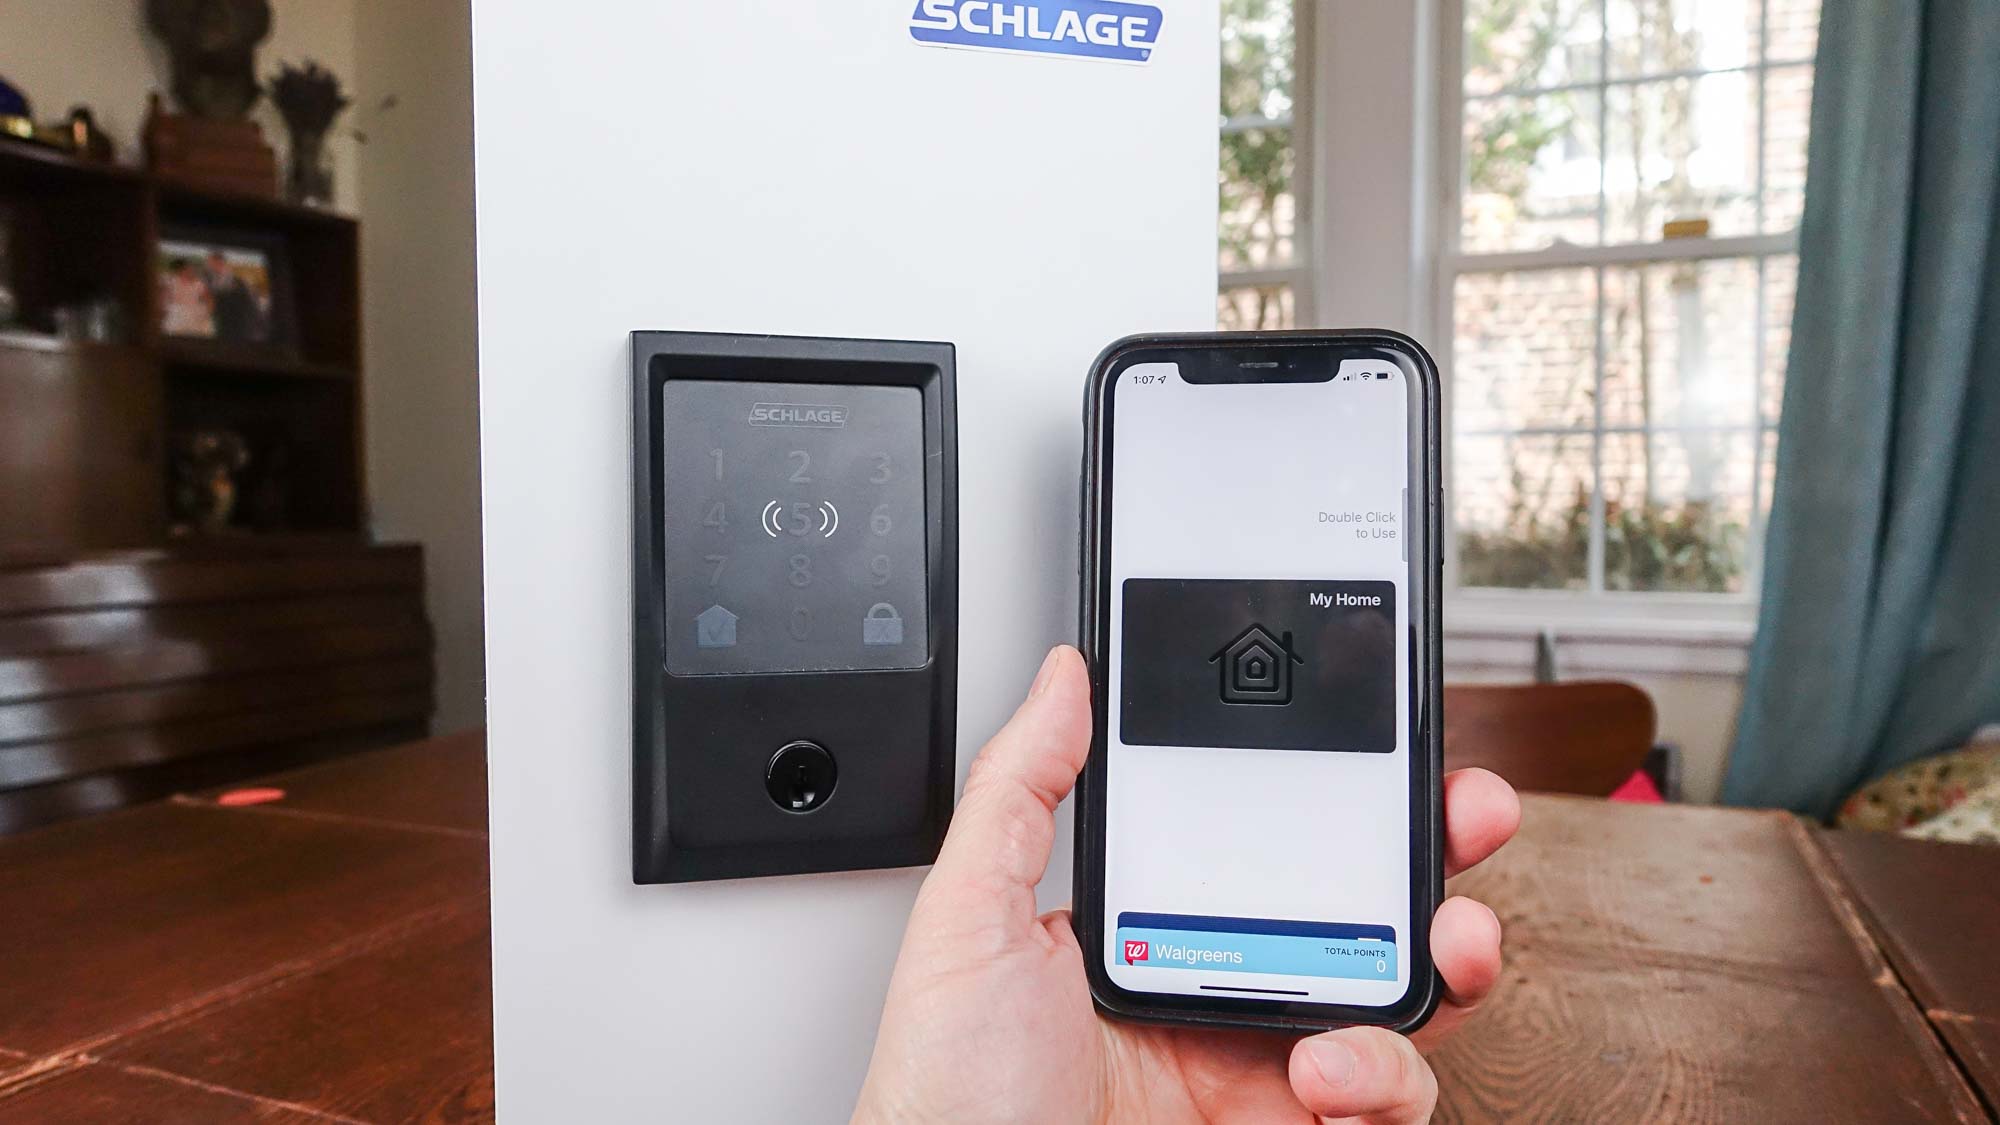 Schlage Encode Plus synched with phone app